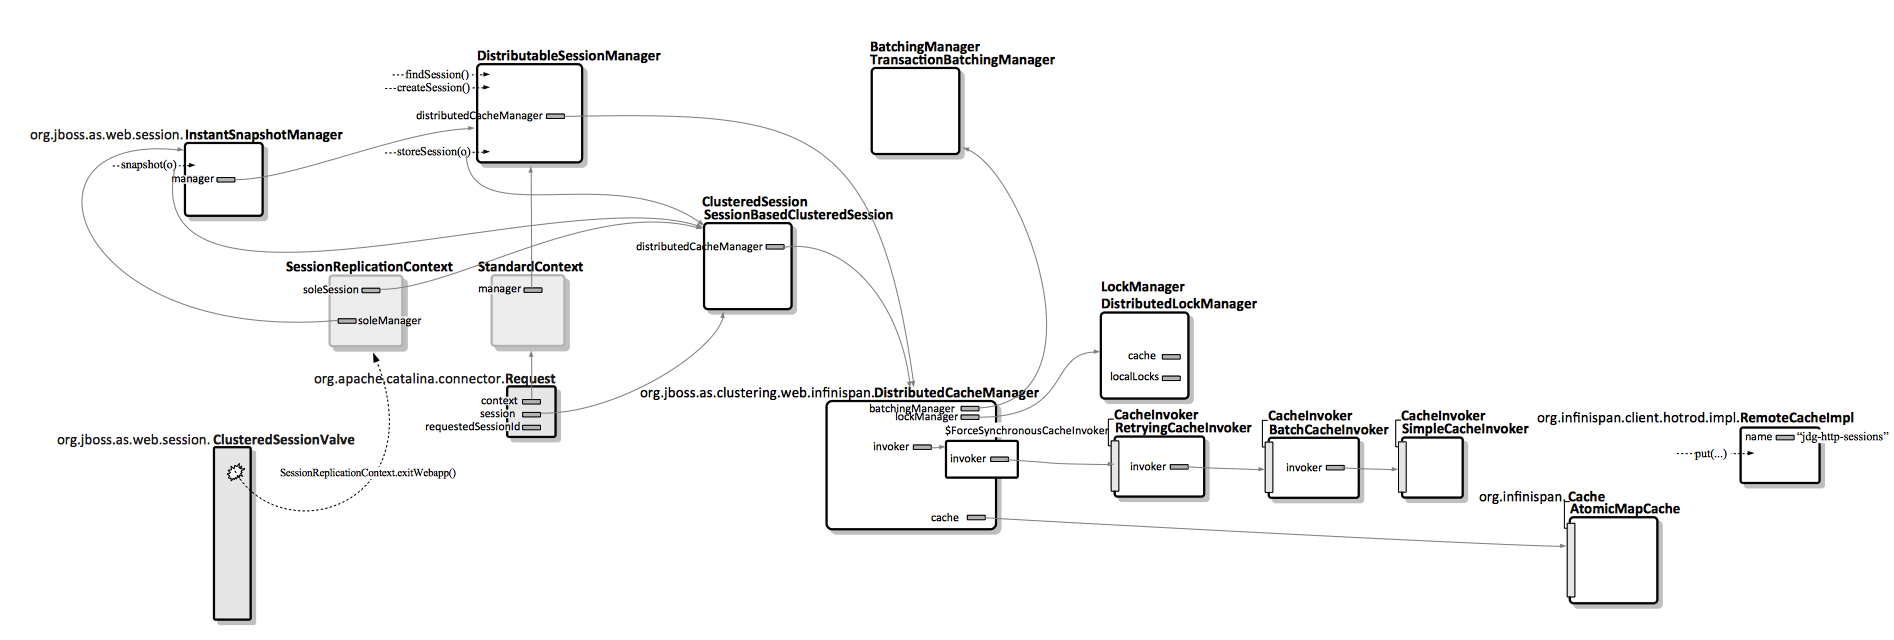 JBoss7 HTTP Session Replication Architecture.png